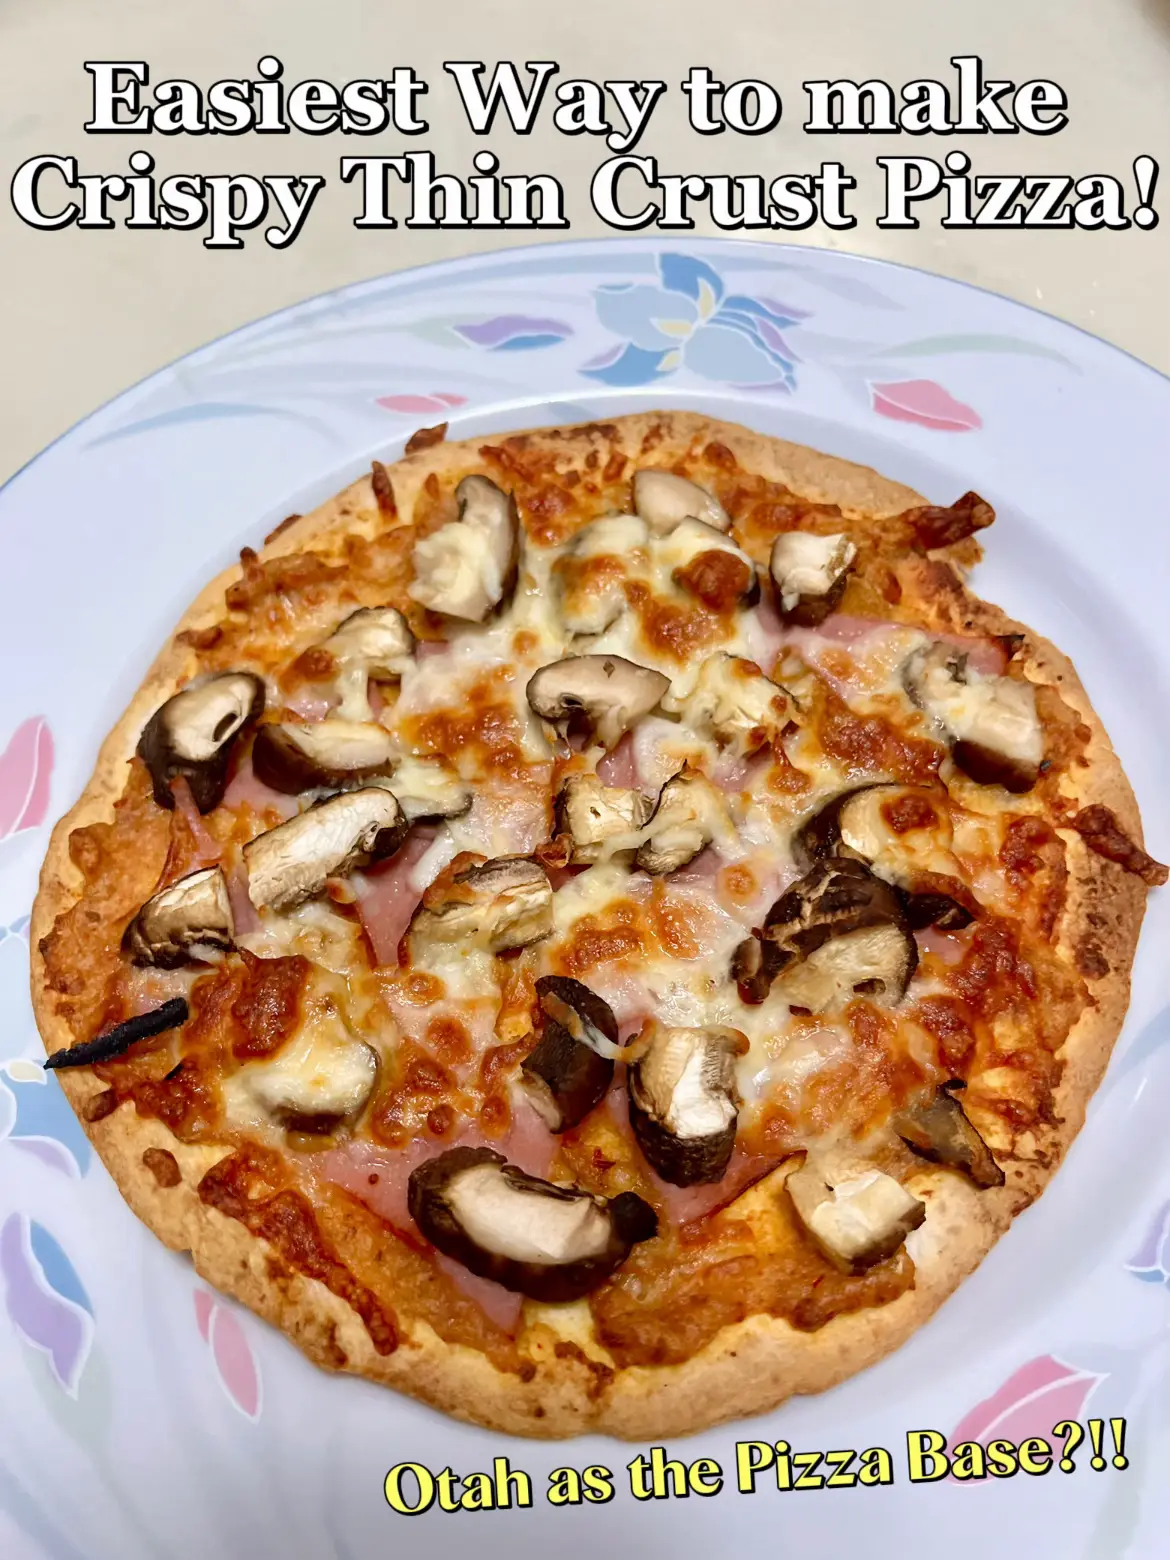 Pizza hack = WRAPS AND OTAH! 's images